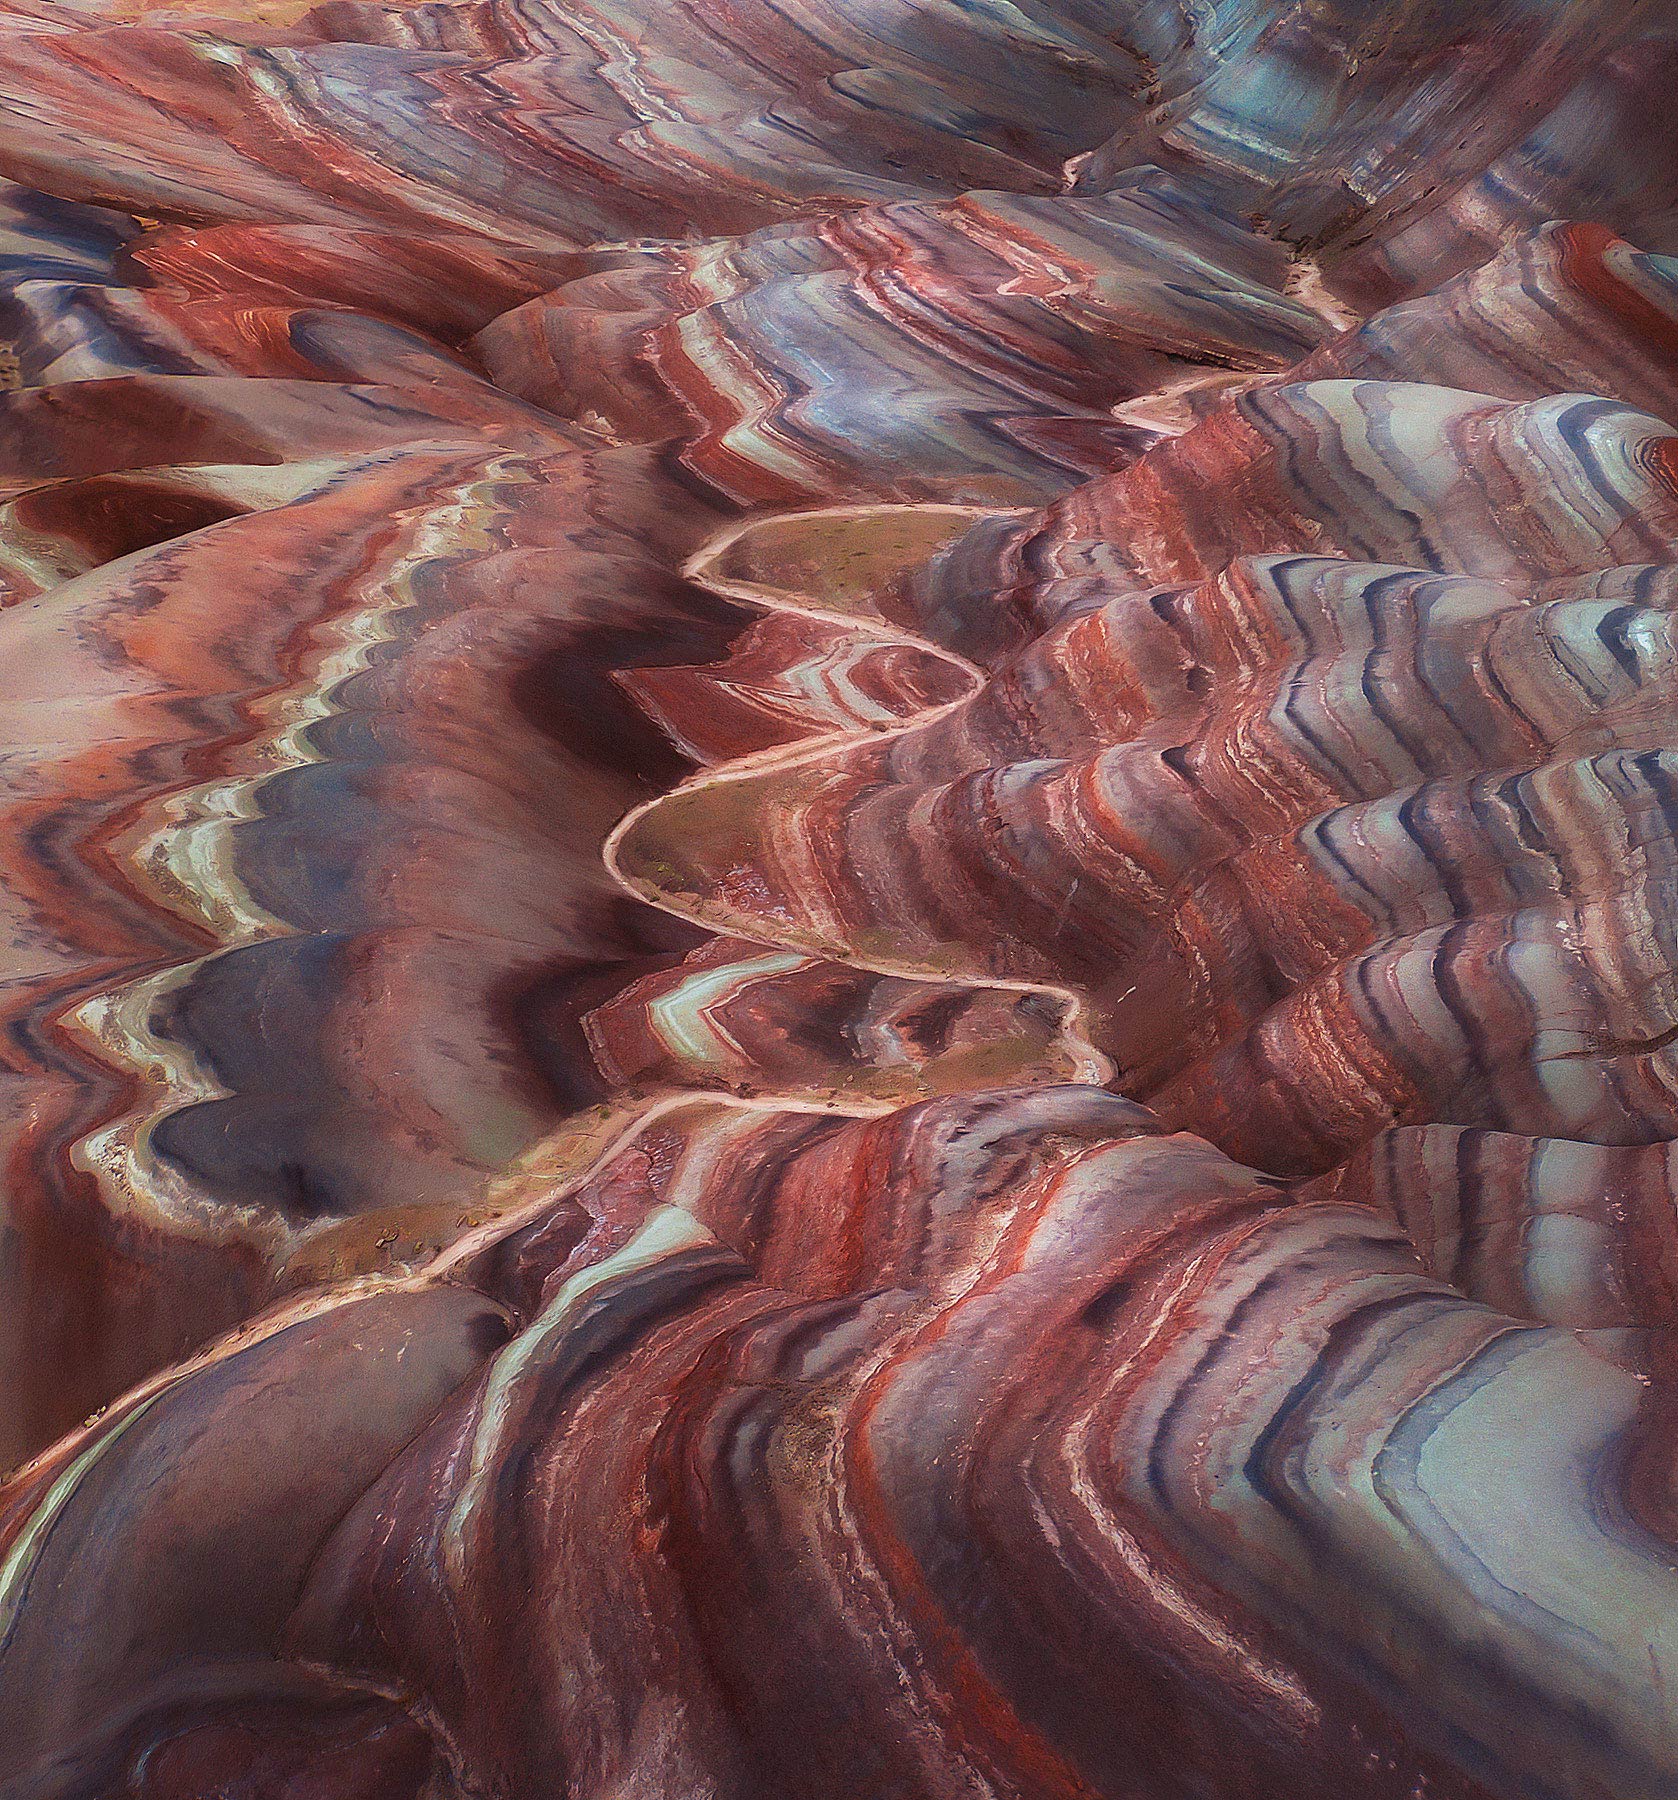 A wash cuts through layers of colorful badlands in the desert Southwest